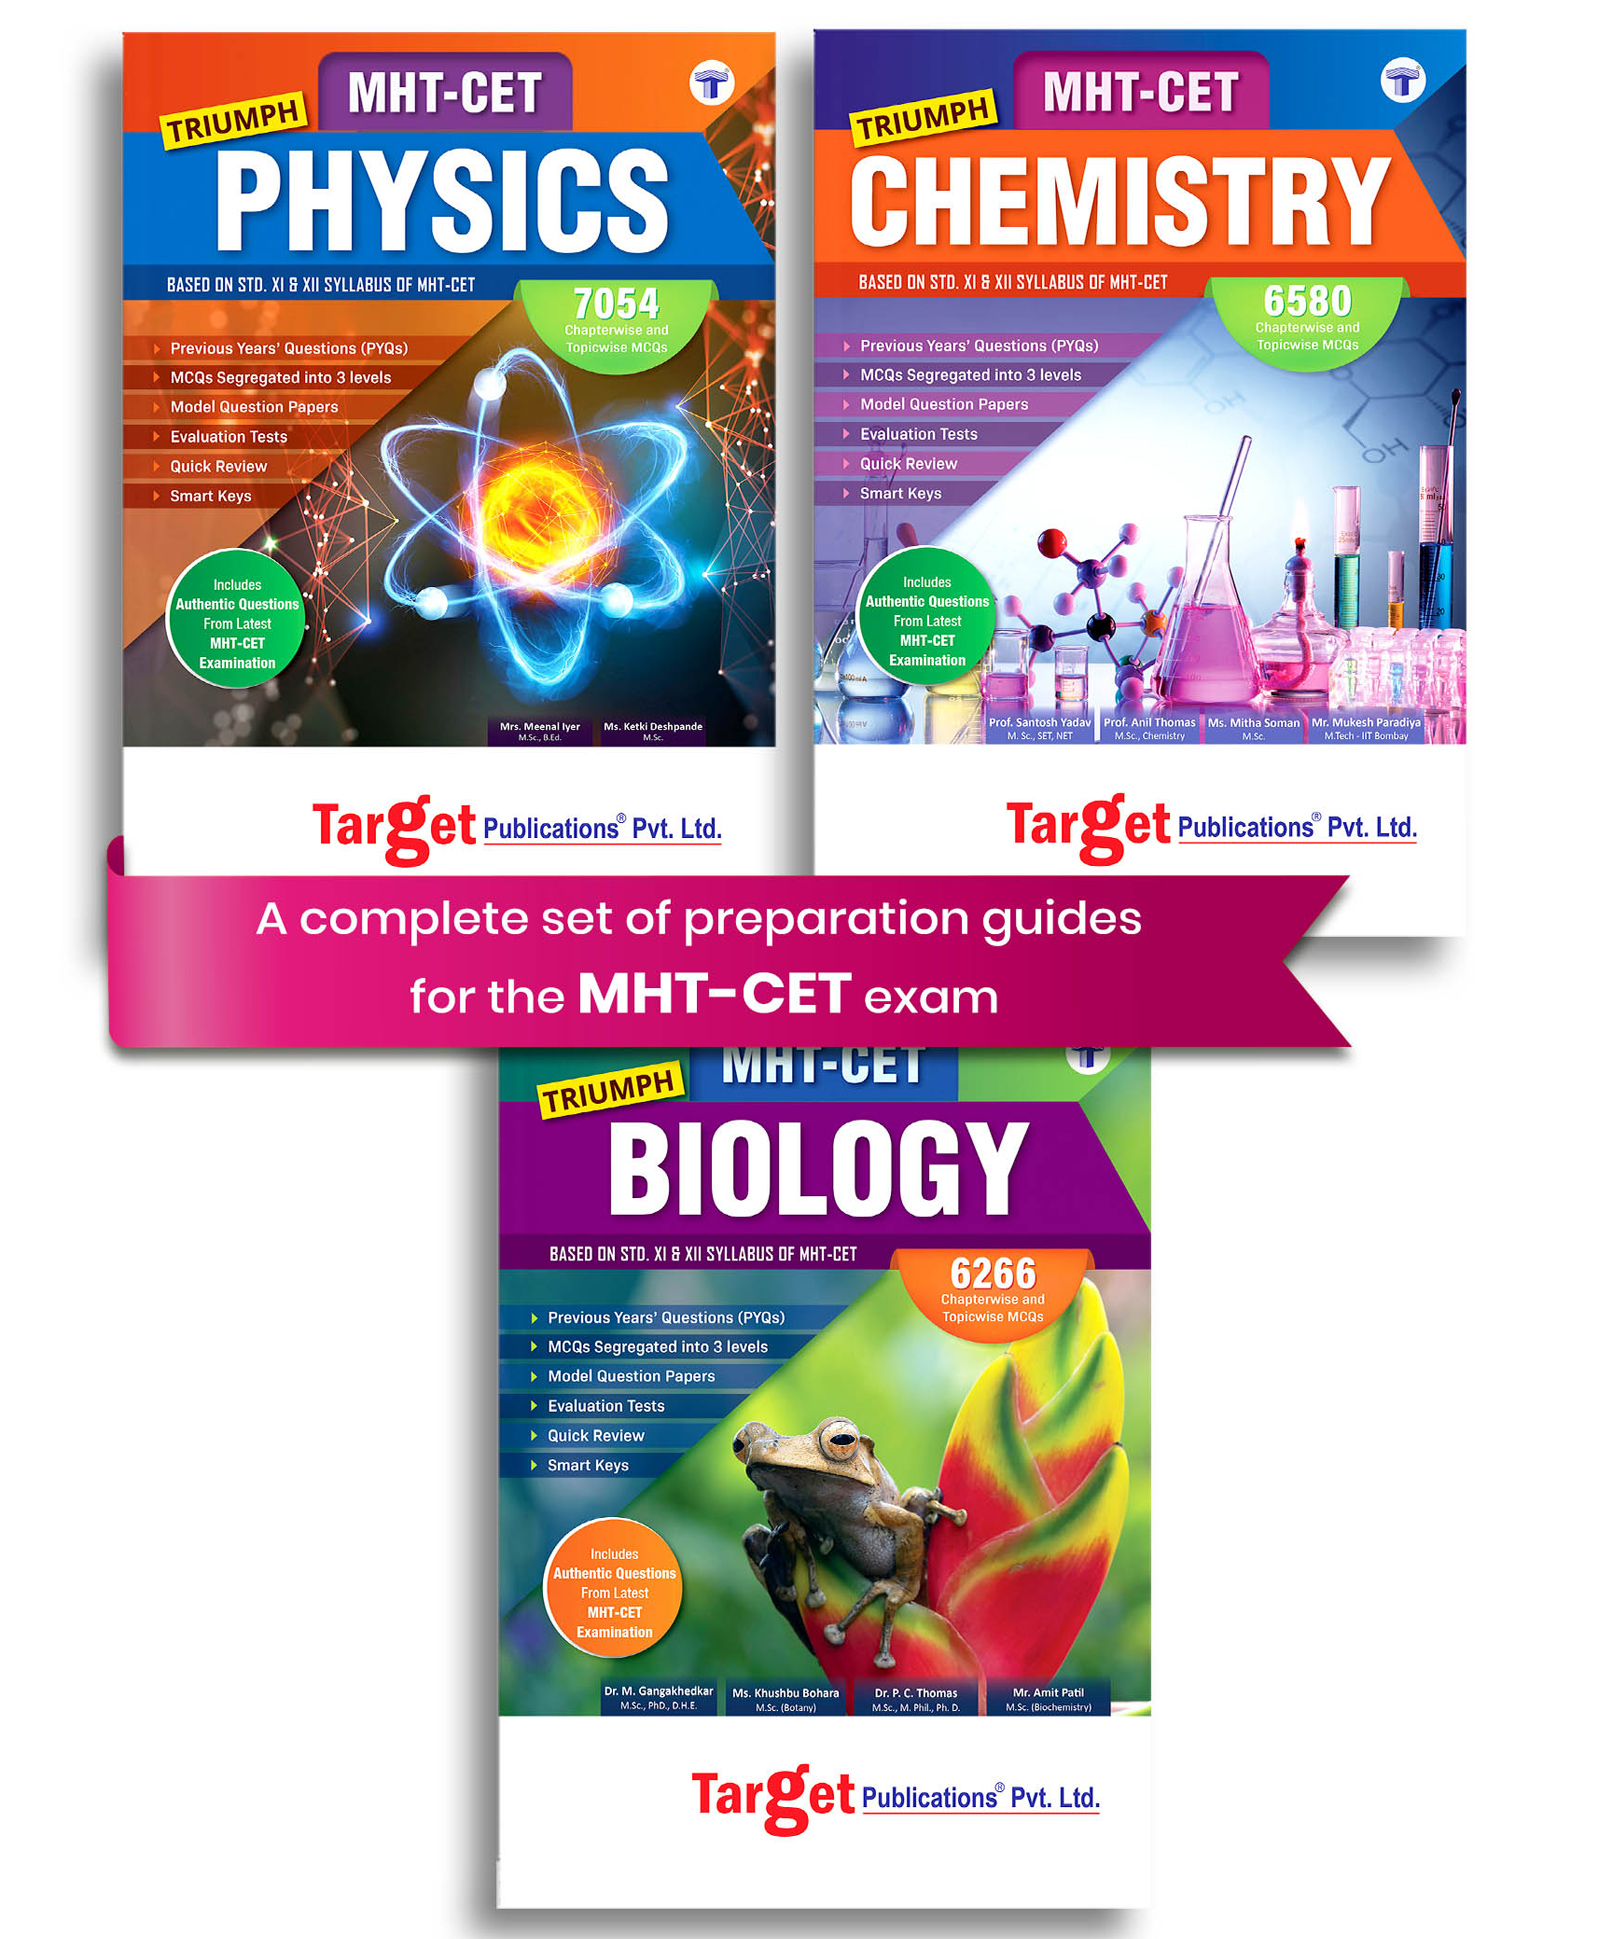 MHT-CET Triumph Physics, Chemistry and Biology MCQ Books Combo for 2021  Pharmacy Entrance Exam - English Online in India, Buy at Best Price from   - 9283505